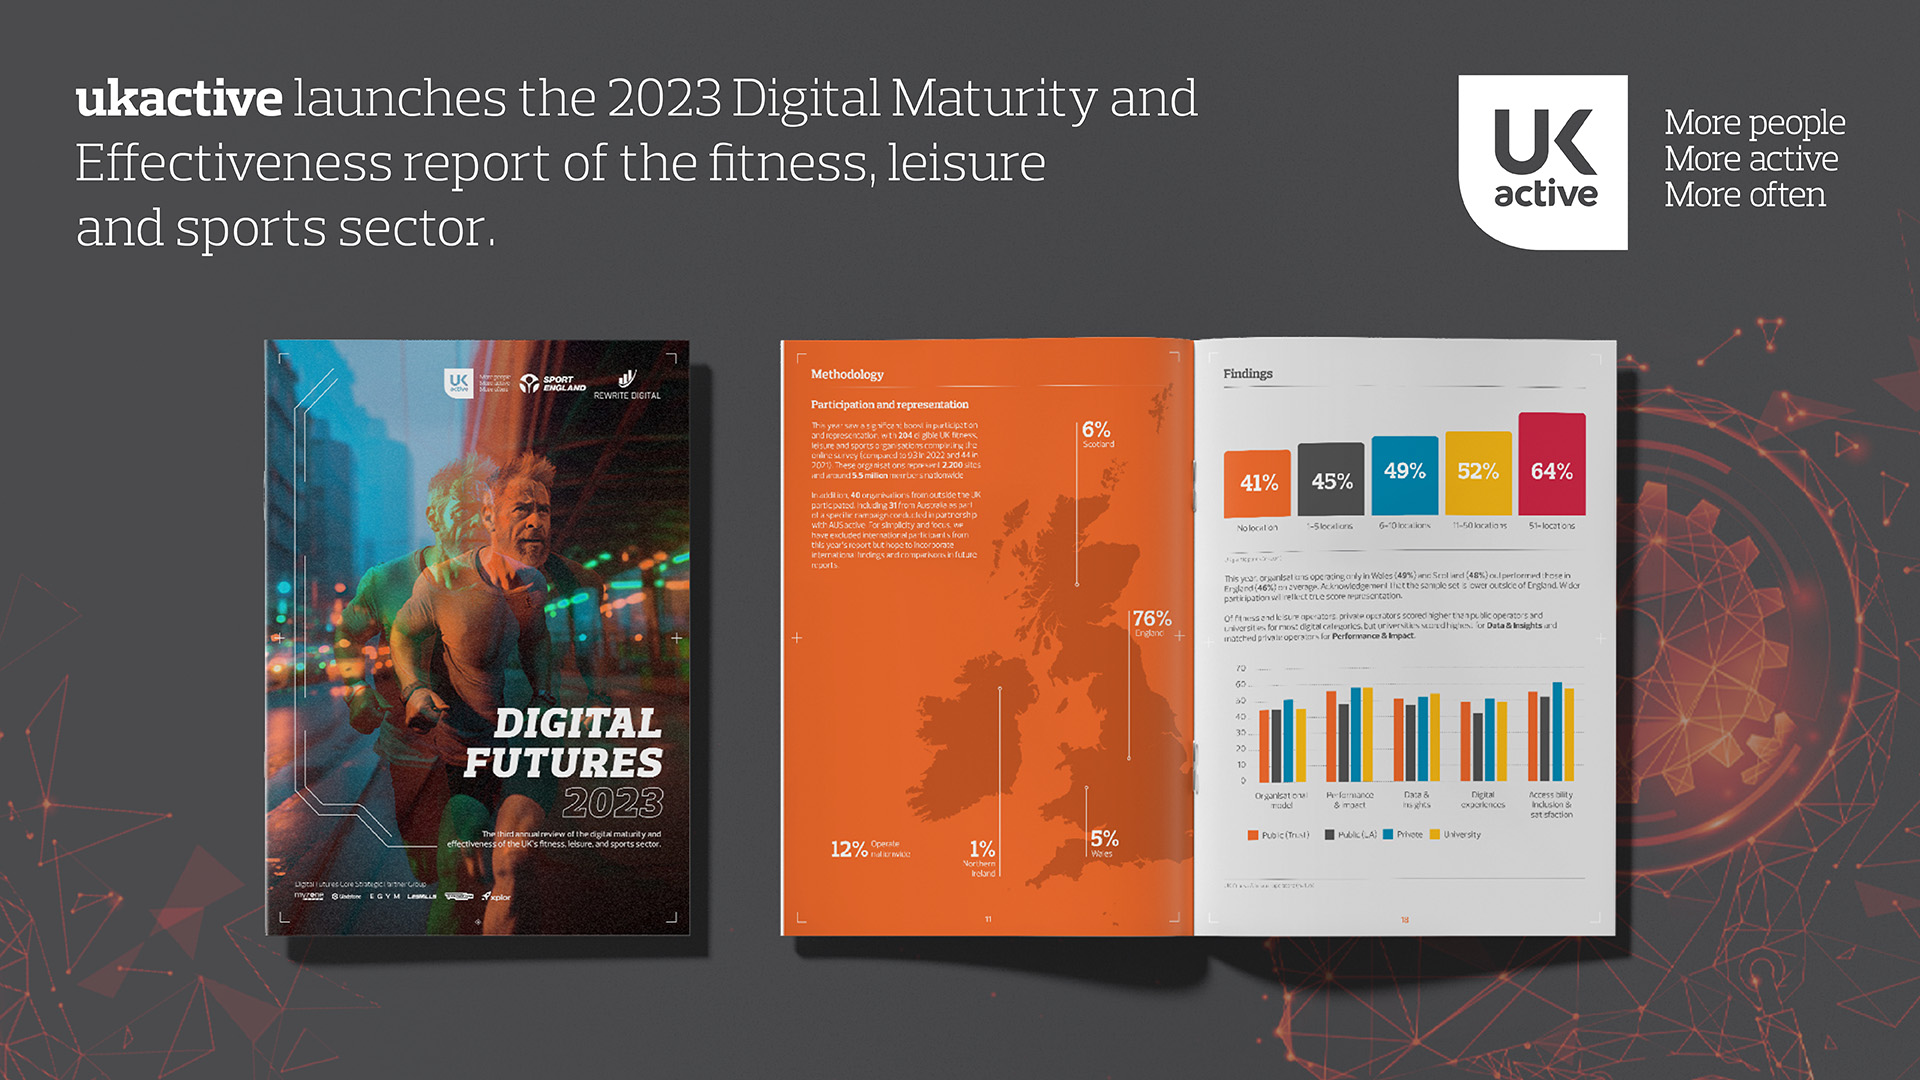 Third Digital Futures report shows rewards for operators investing in digital strategy